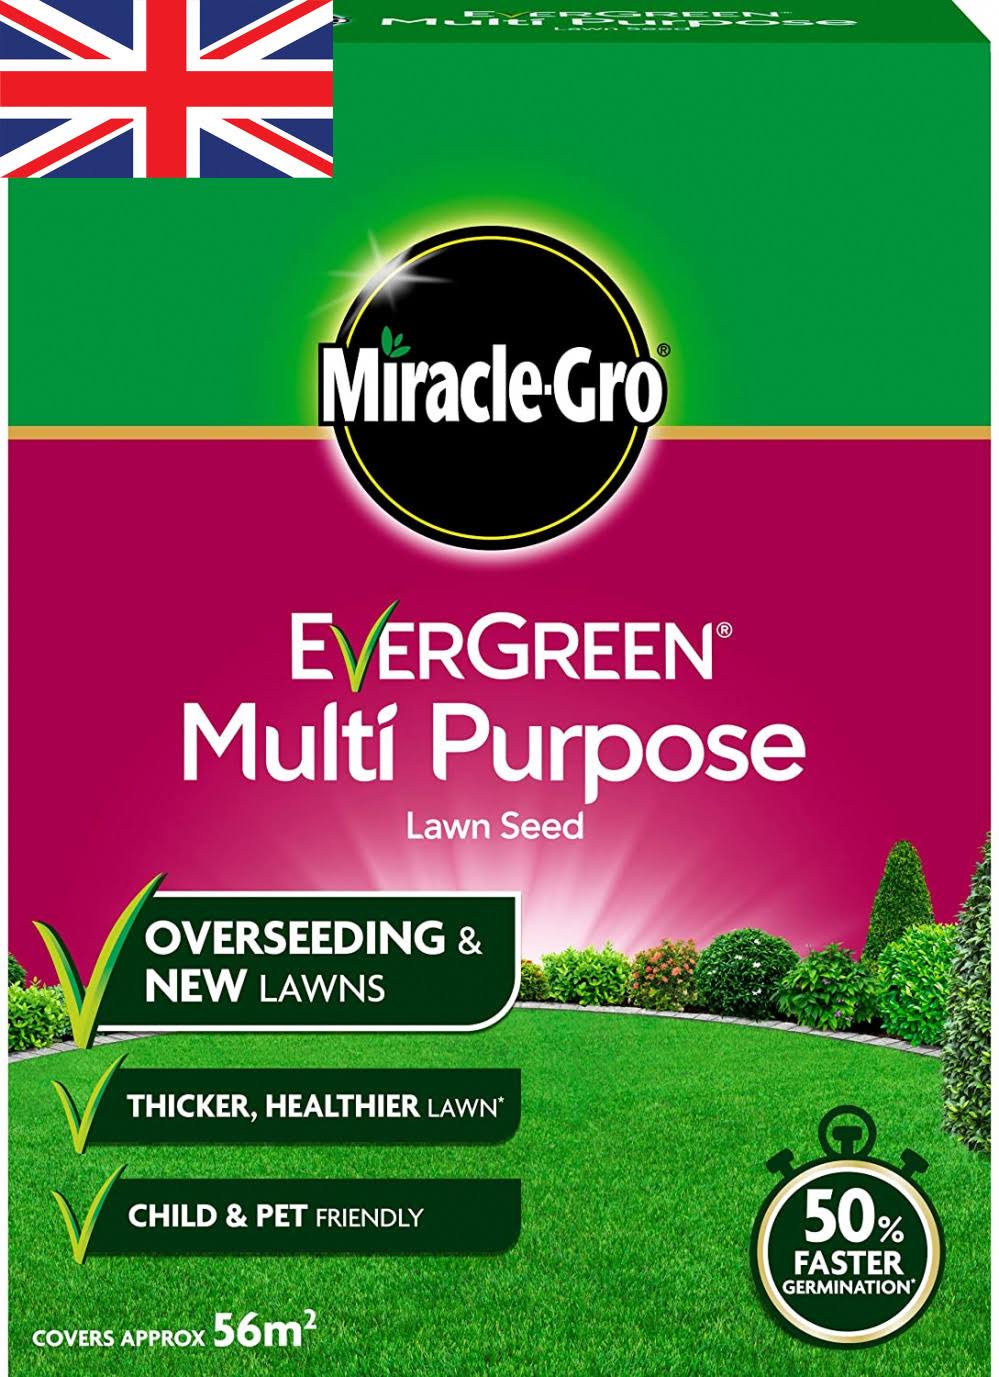 Miracle-Gro Multi Purpose Grass Seed 1.6kg [119615]